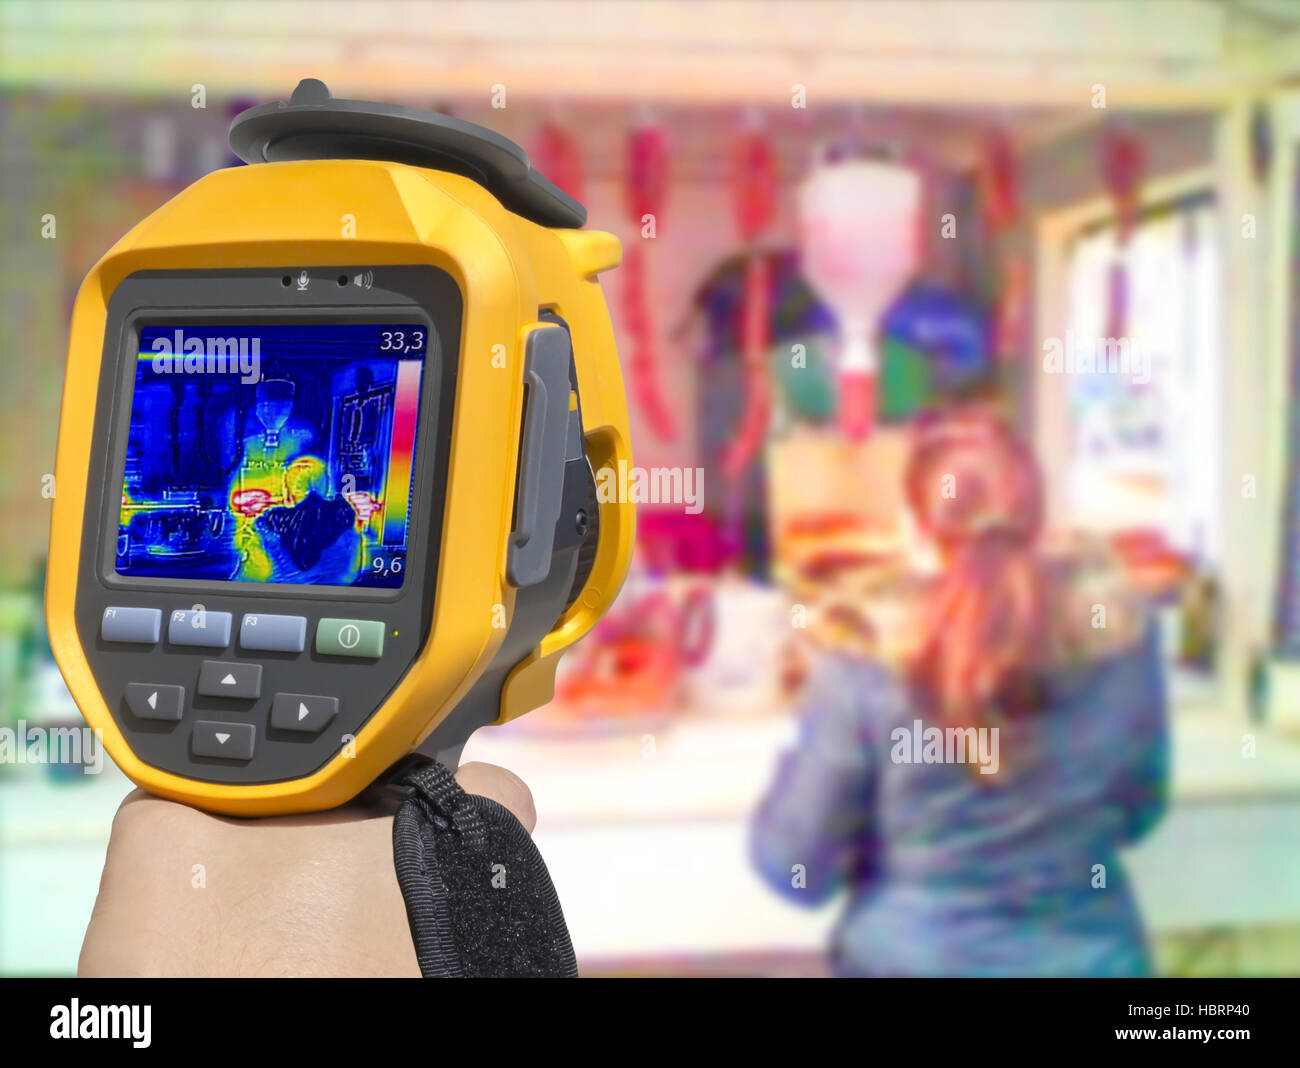 Recording with Thermal camera street stand selling food Stock Photo